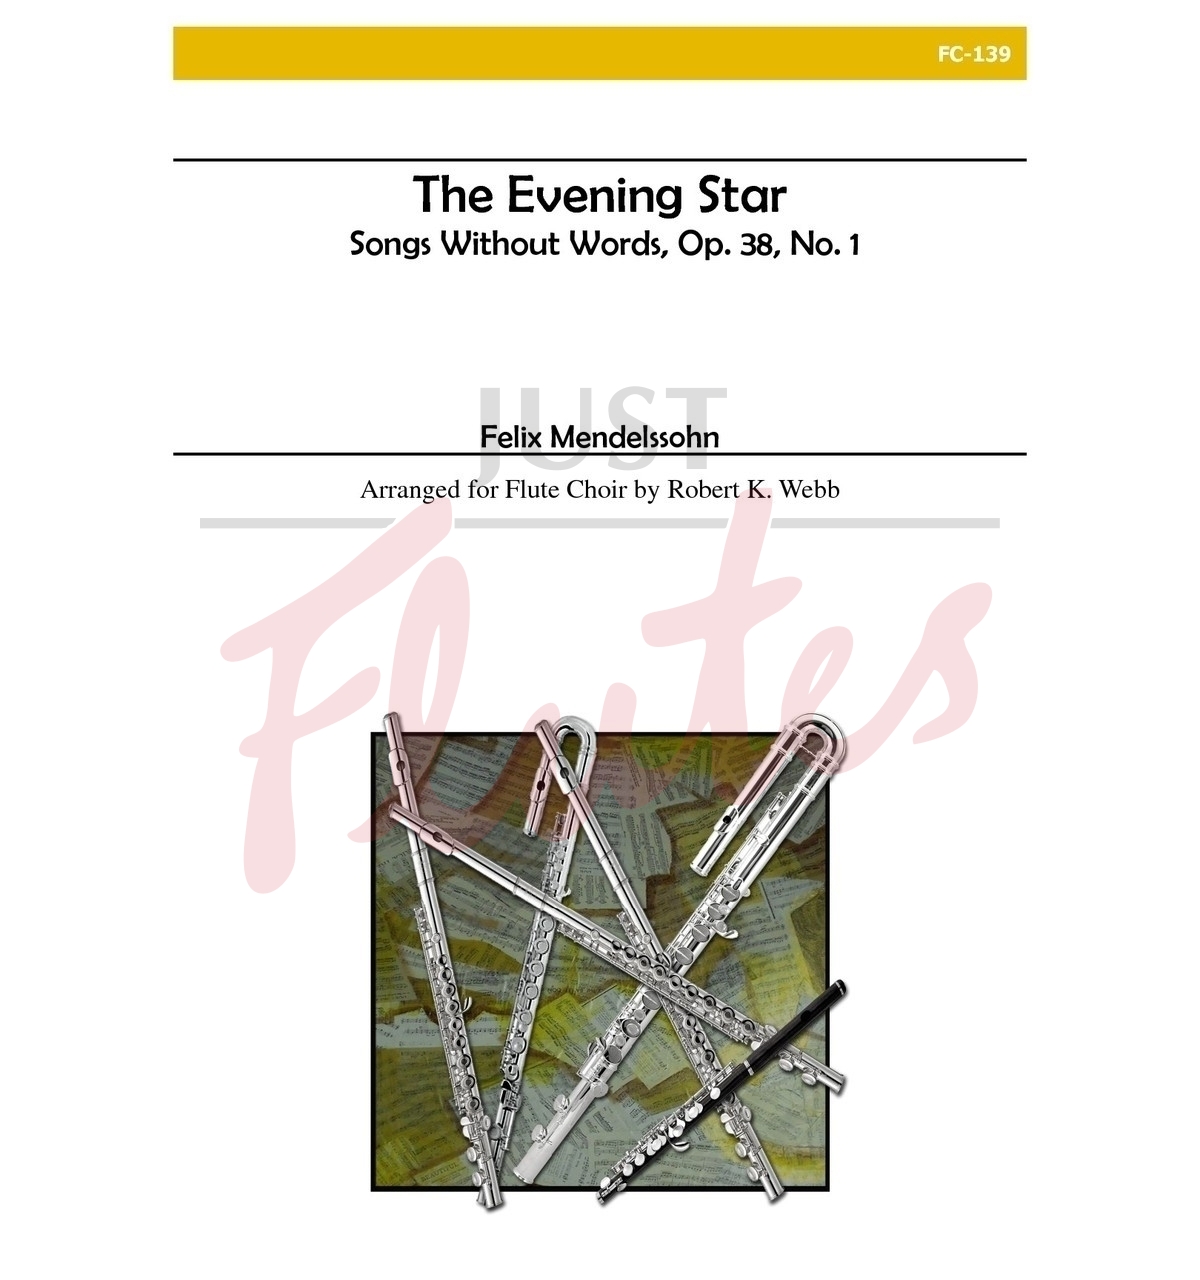 The Evening Star: Songs Without Words